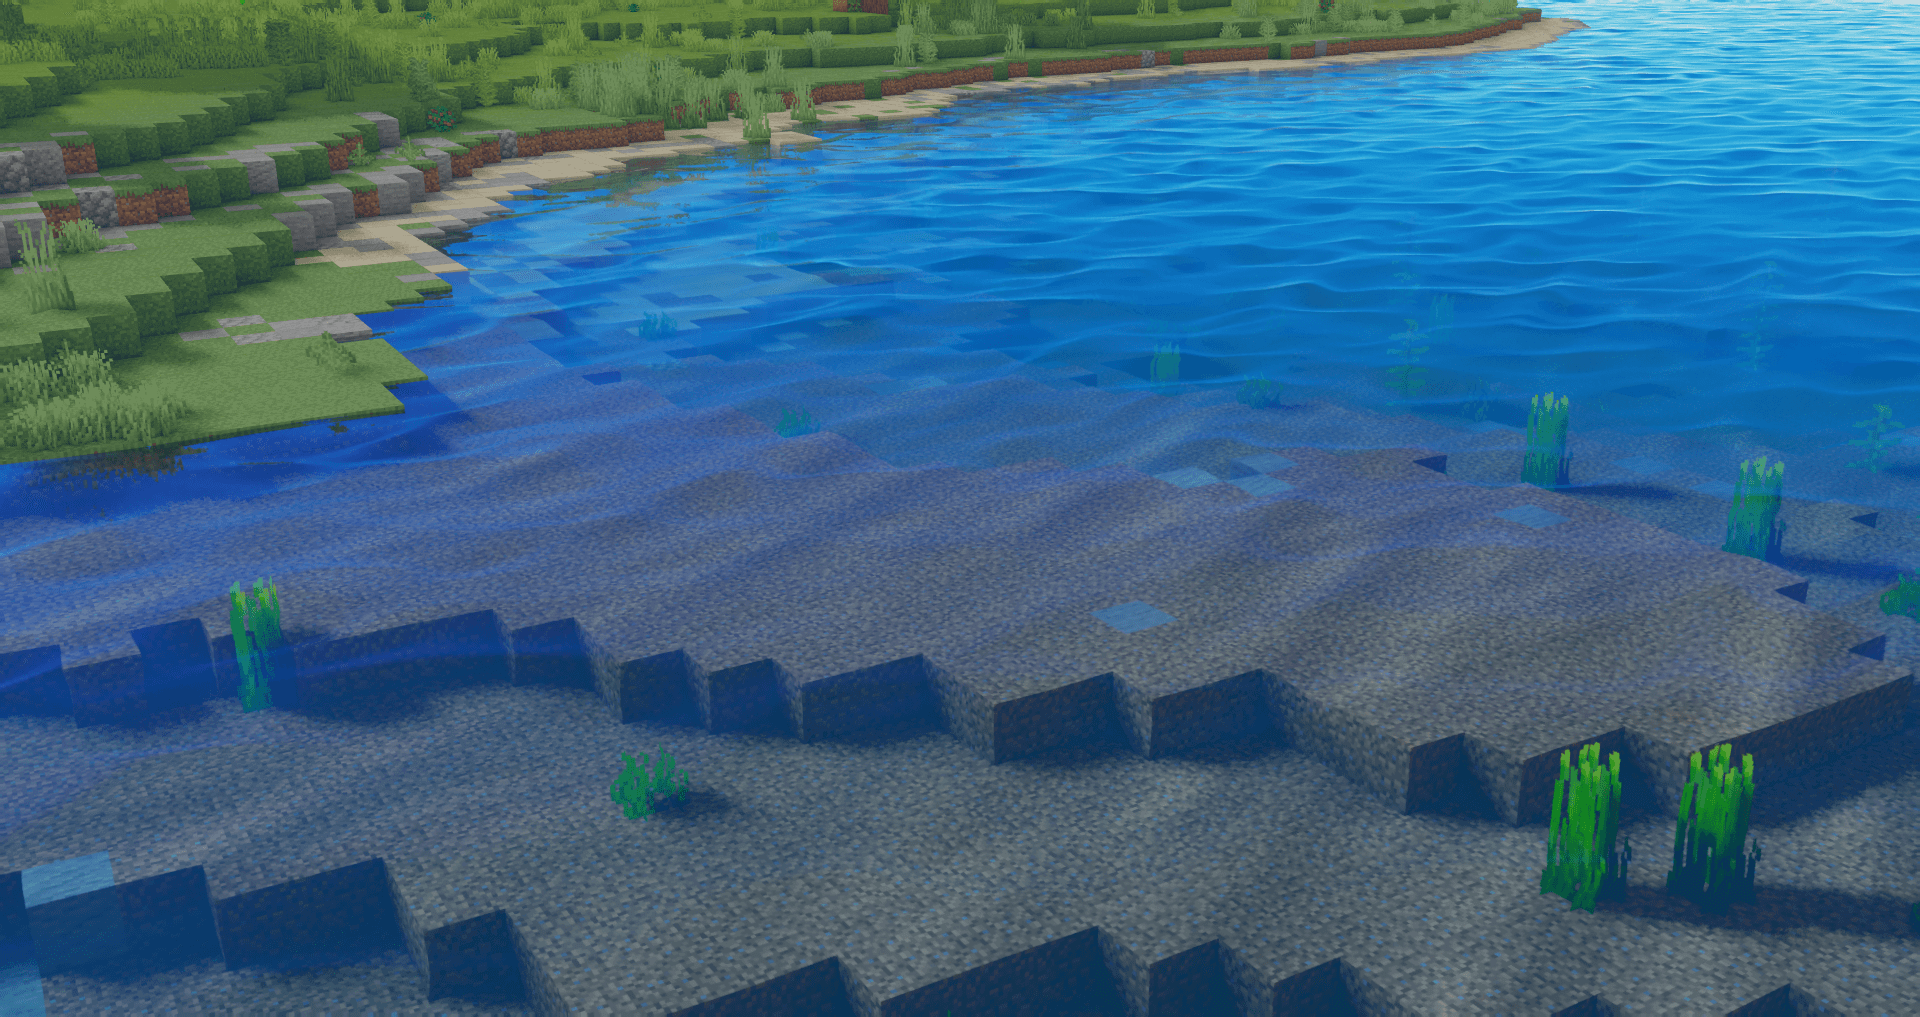 Old Lighting & Water Minecraft Texture Pack